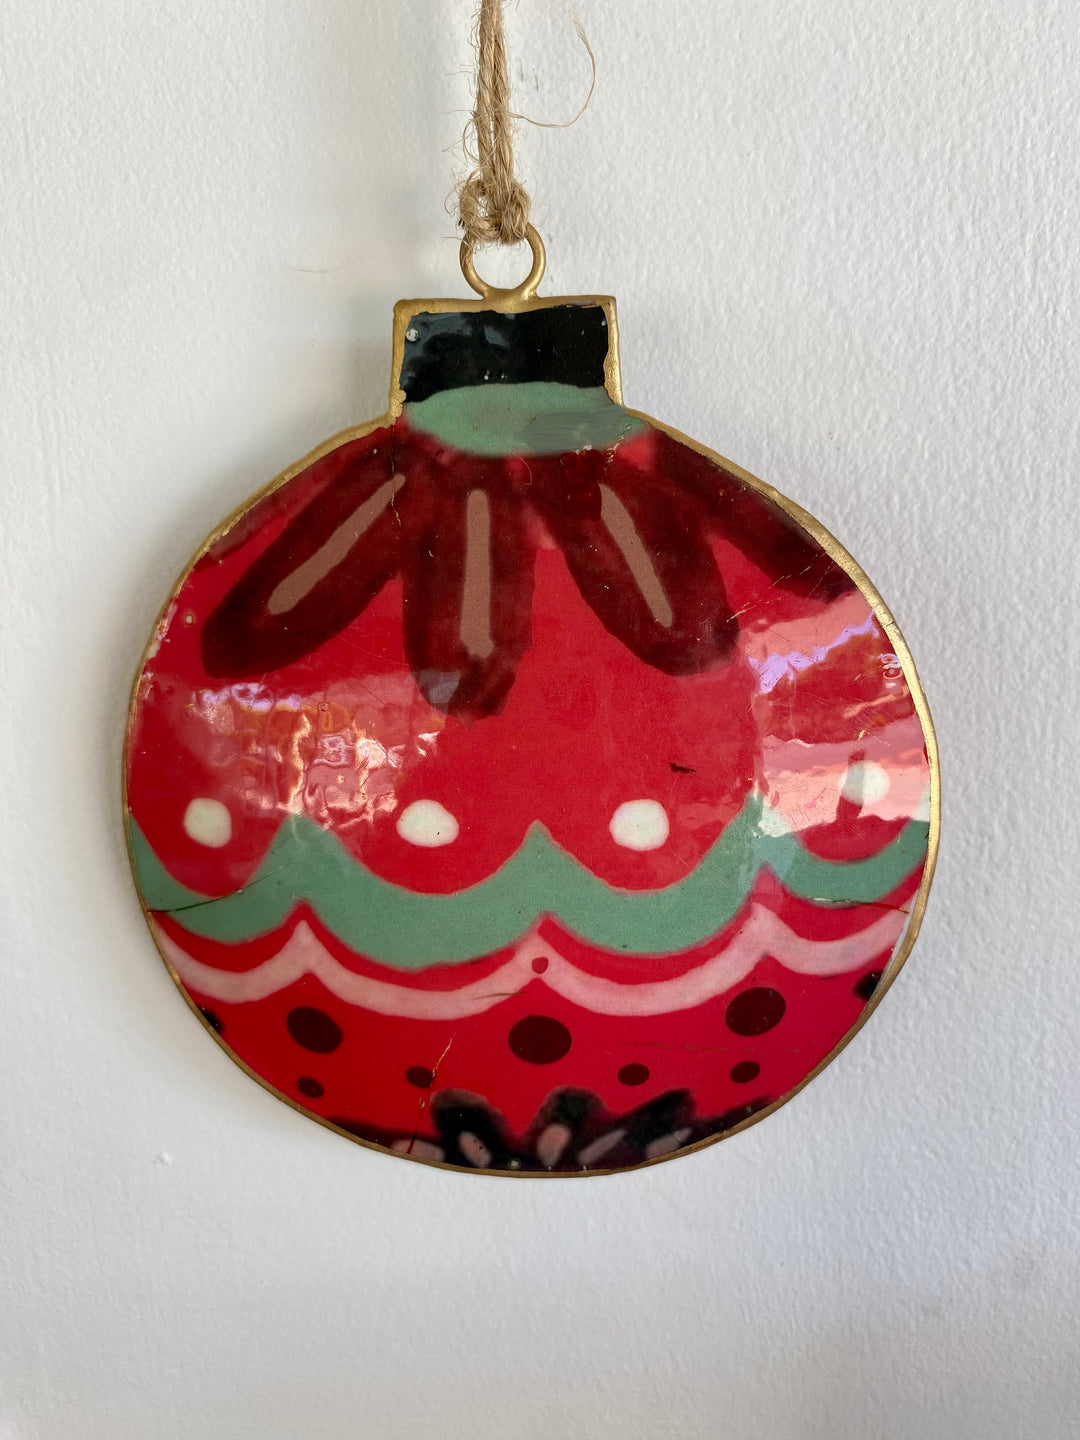 Repurposed Iron Christmas Decoration of Red and Green Bauble